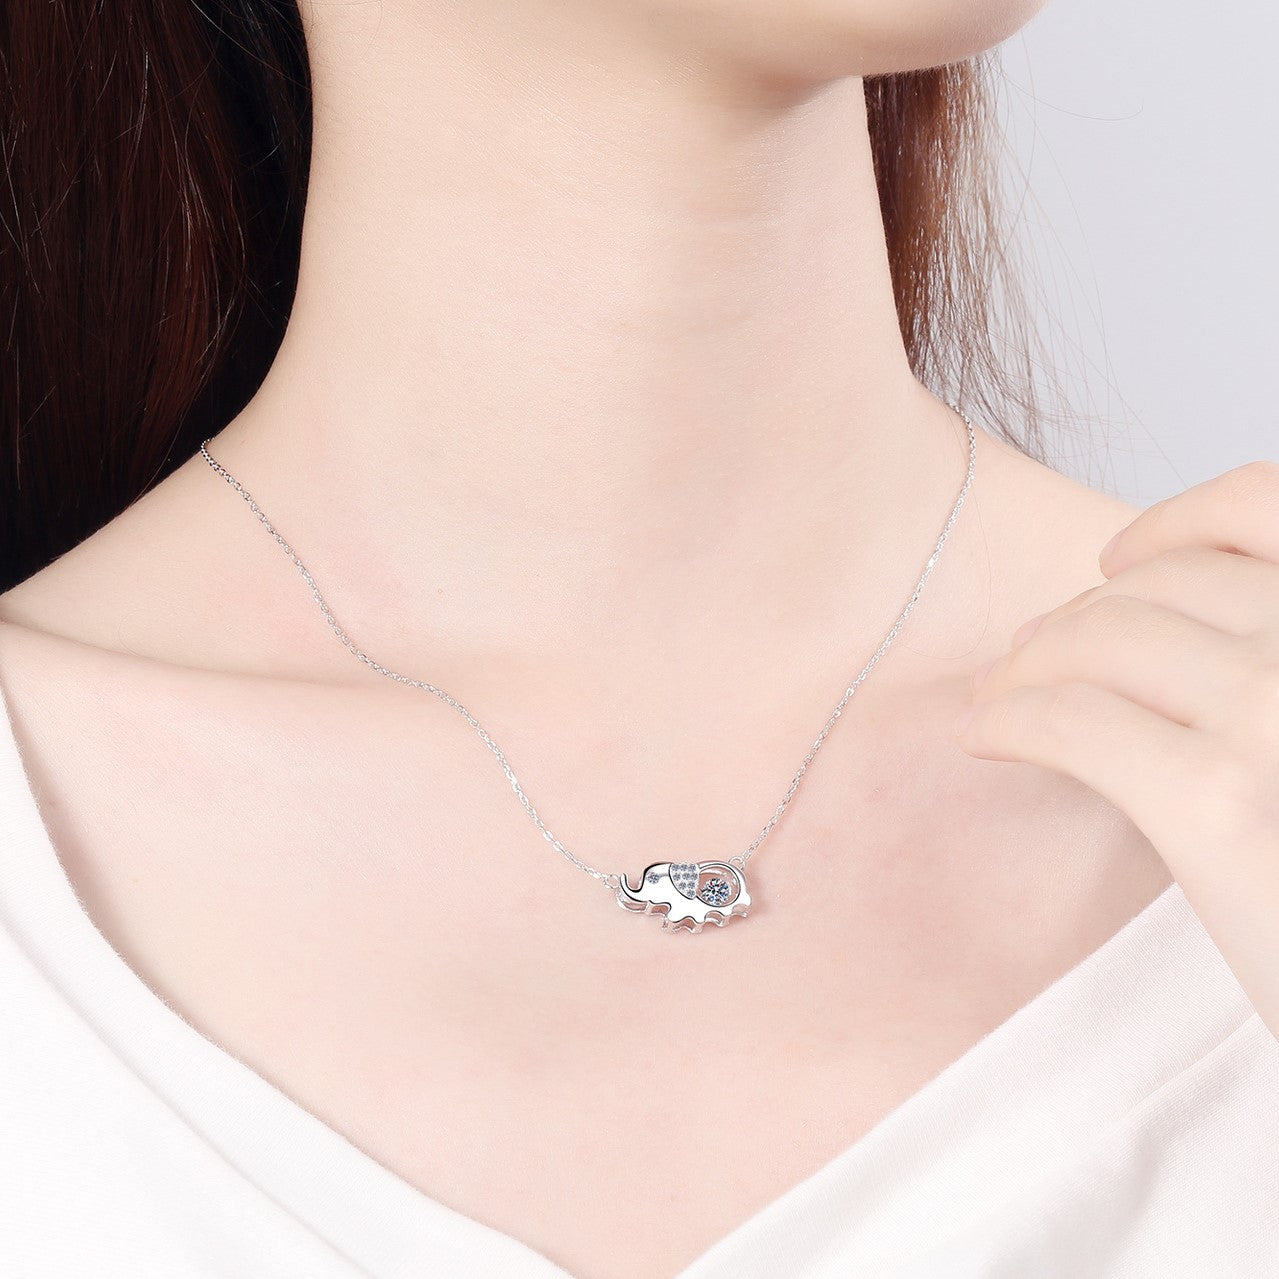 Moissanite Dancing Necklace, S925 Sterling Silver, 0.5ct Moissanite diamond necklace, Gift for Her, Gift for Girlfriend, girl, Gift for Women, Gift for Mother, Mom, Mum, gift for wife, for lover, Birthday, Anniversary, Valentine’s Day, Mother’s Day, Graduation Day,